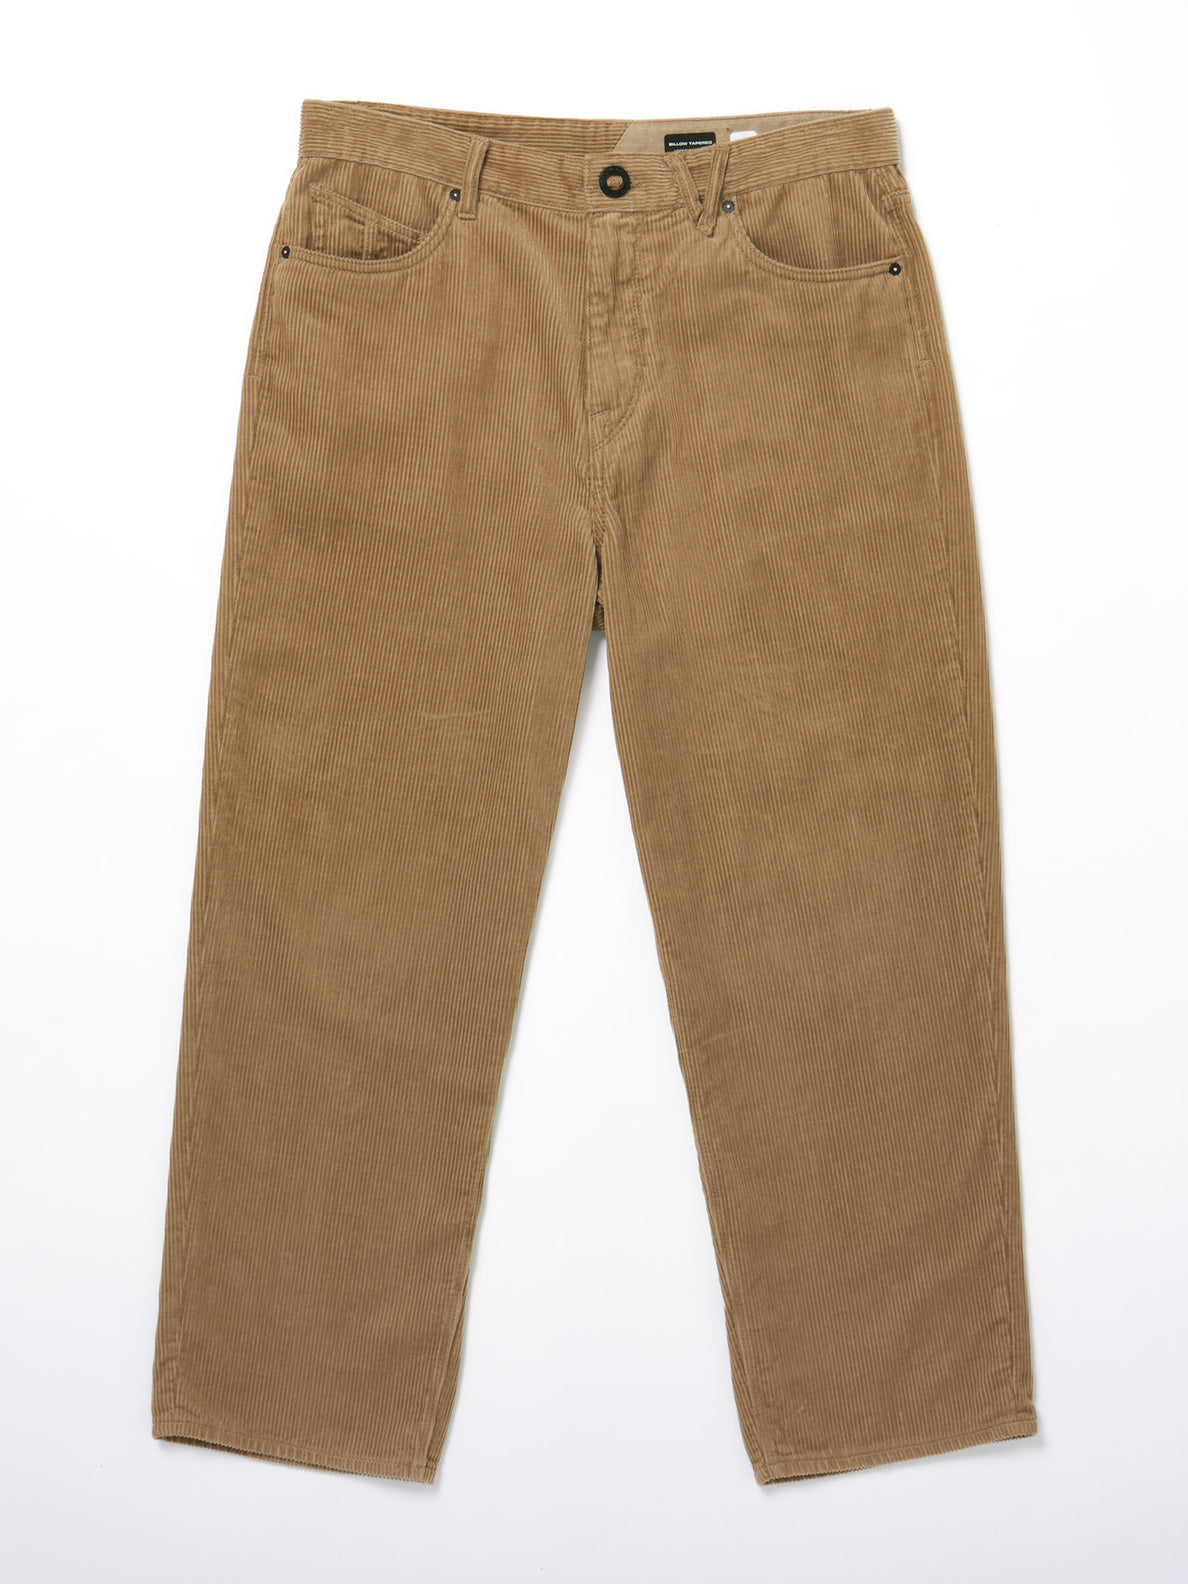 Casual Corduroy Men Pants ⎮ SWS Clothing and Accessories – Streetwear  Society Store